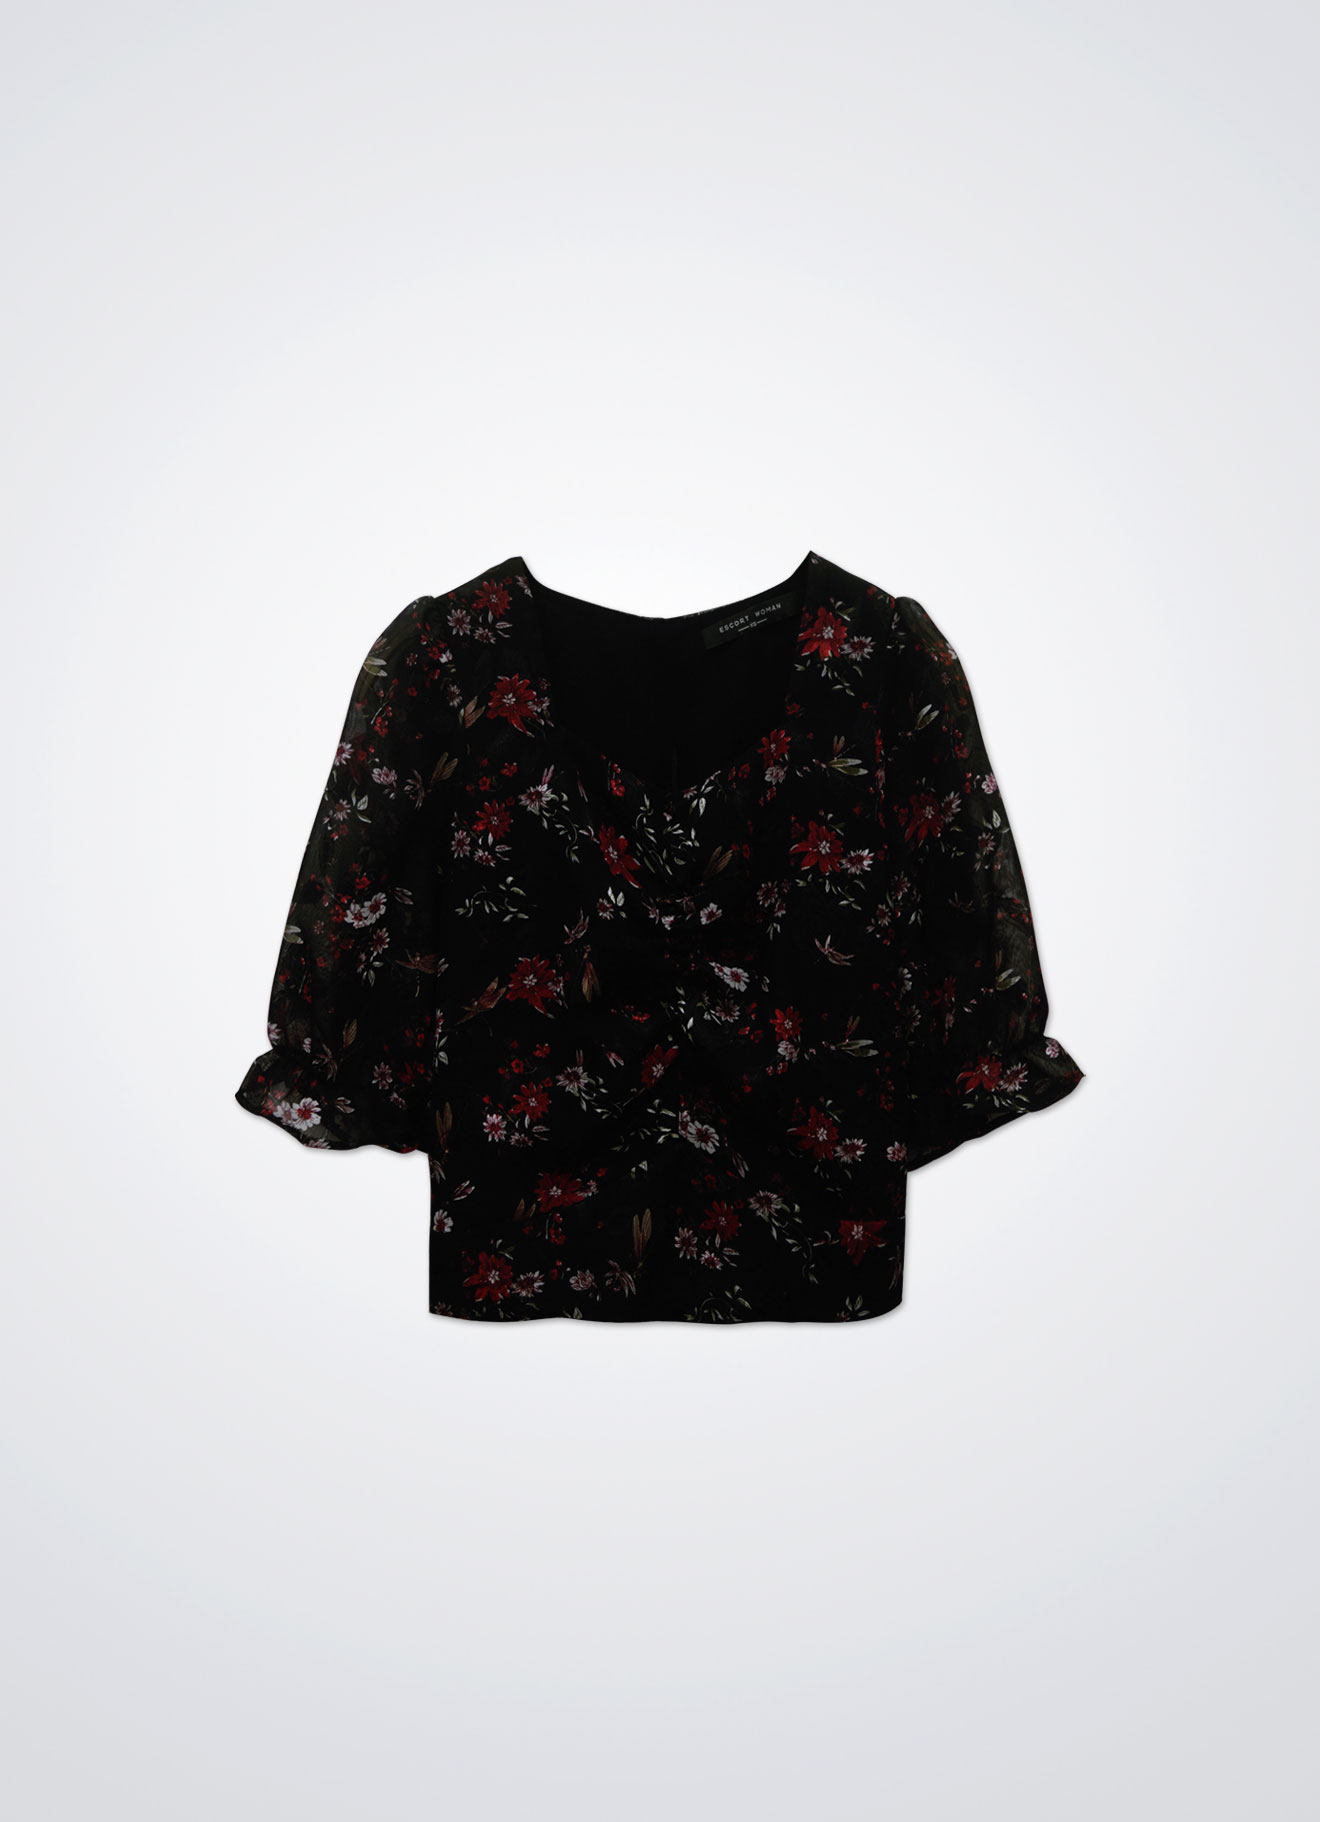 True-Red by Floral Printed Blouse